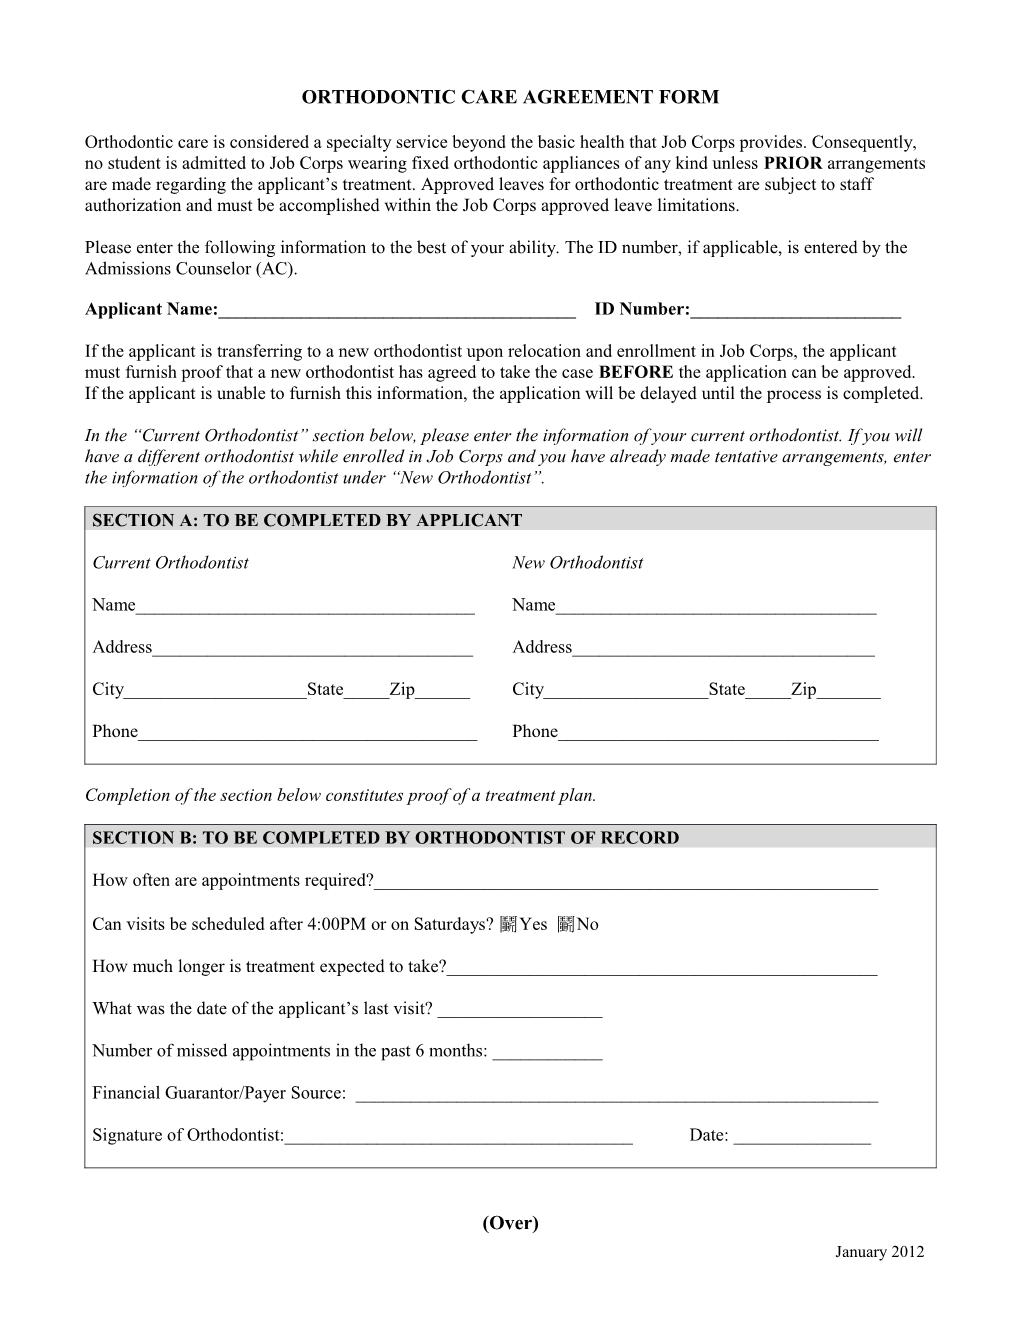 Orthodontic Care Agreement Form